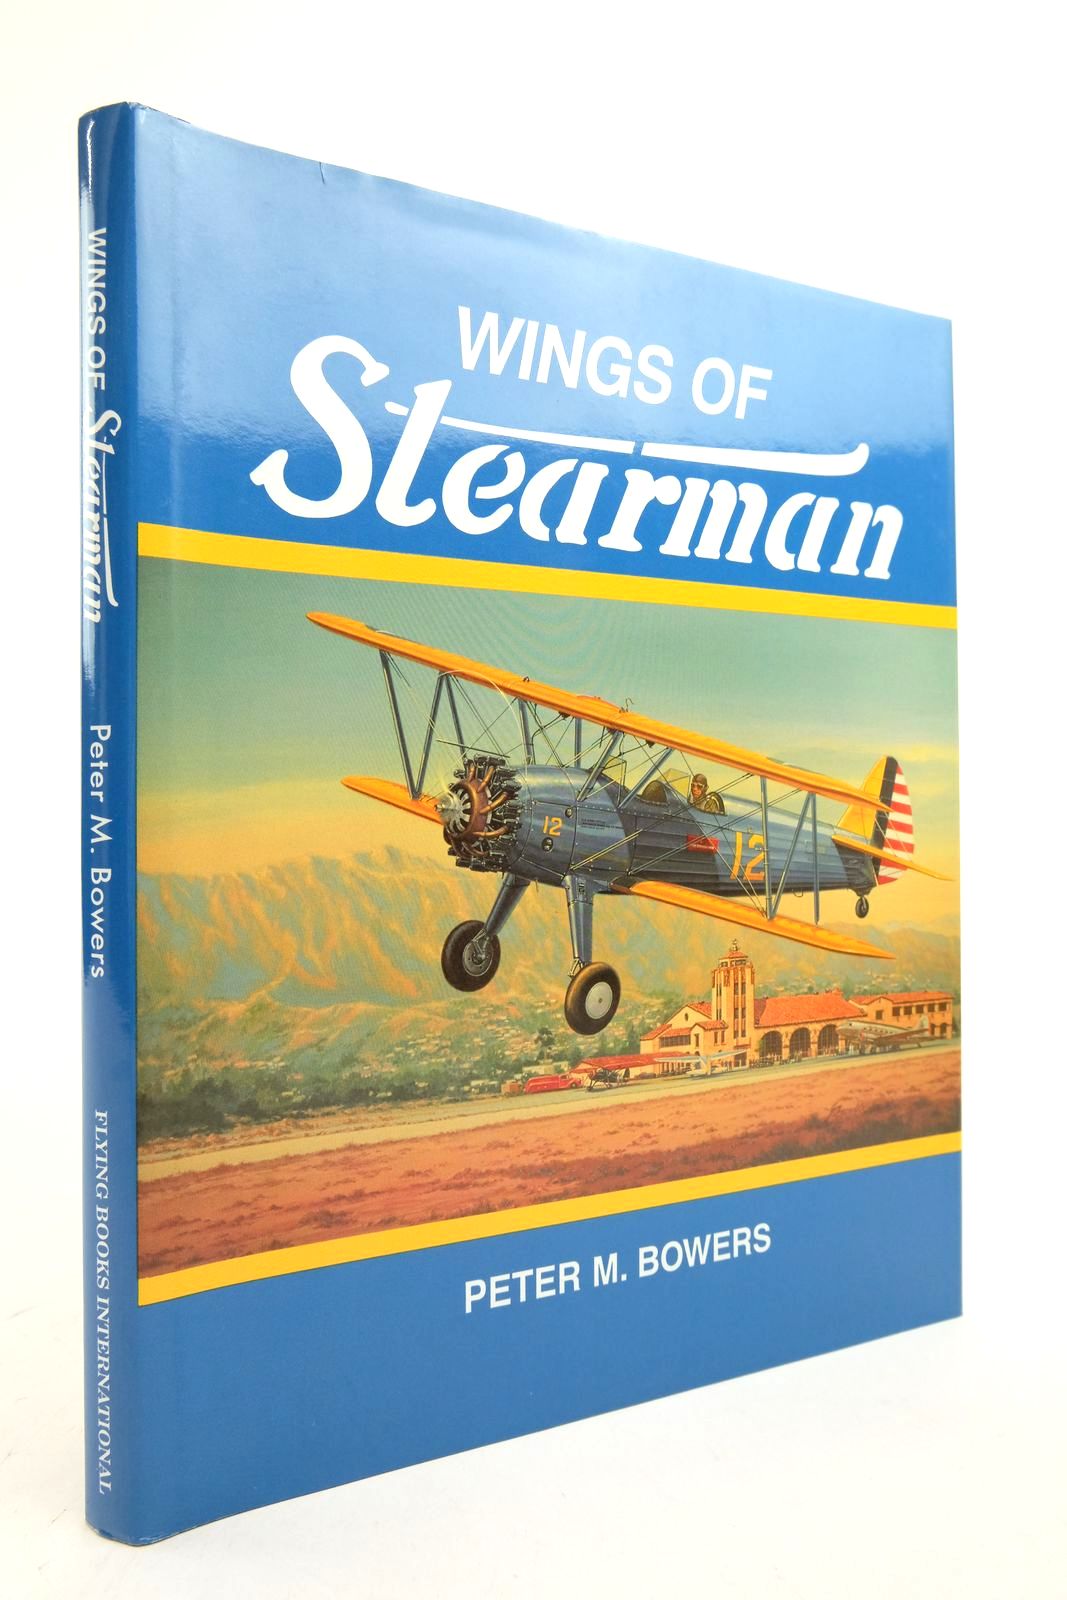 Photo of WINGS OF STEARMAN: THE STORY OF LLOYD STEARMAN AND THE CLASSIC STEARMAN BIPLANES written by Bowers, Peter M. published by Flying Books International (STOCK CODE: 2139654)  for sale by Stella & Rose's Books